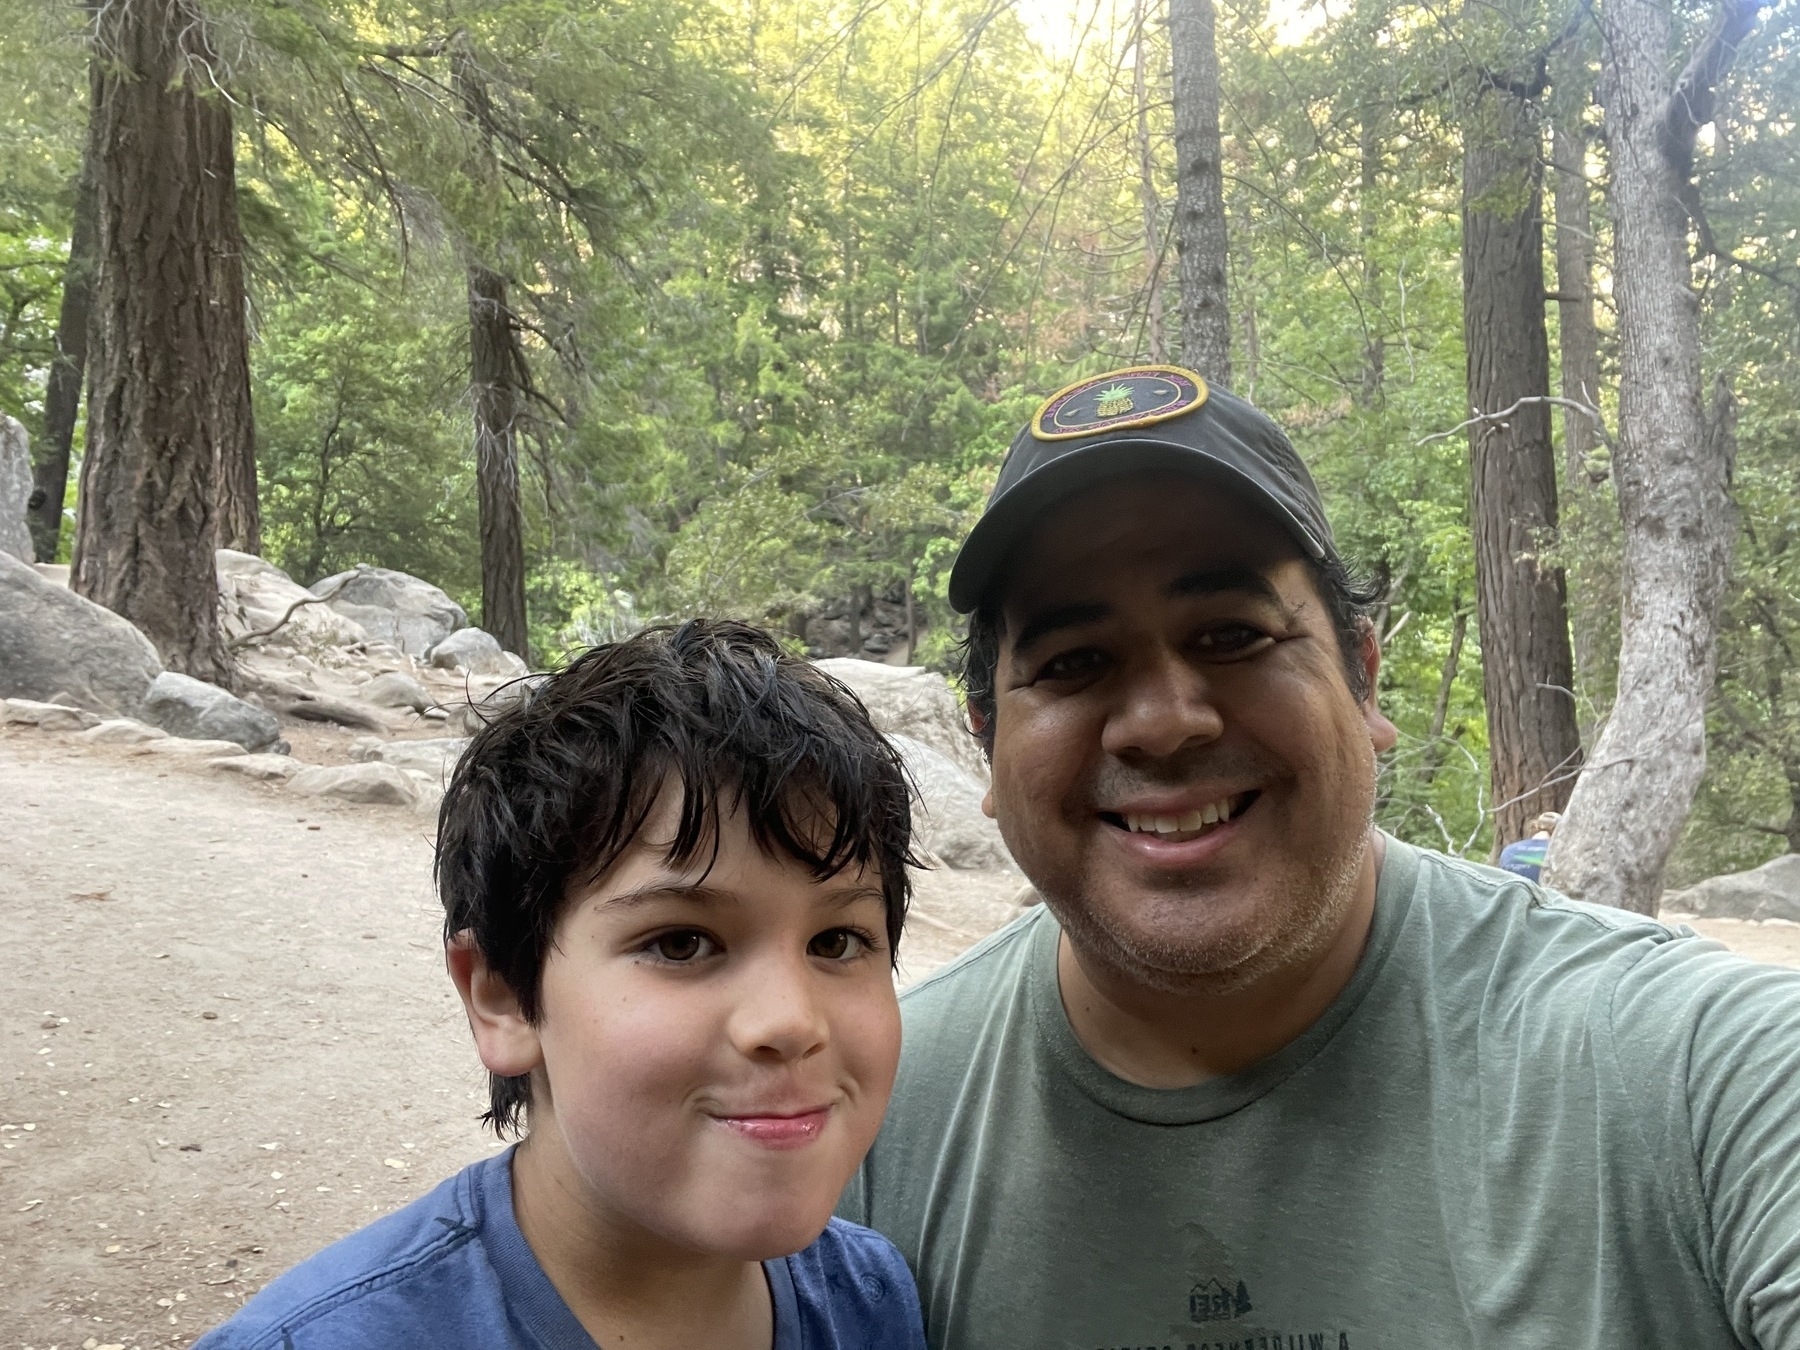 Selfie photo on the Mist Trail in Yosemite National Park